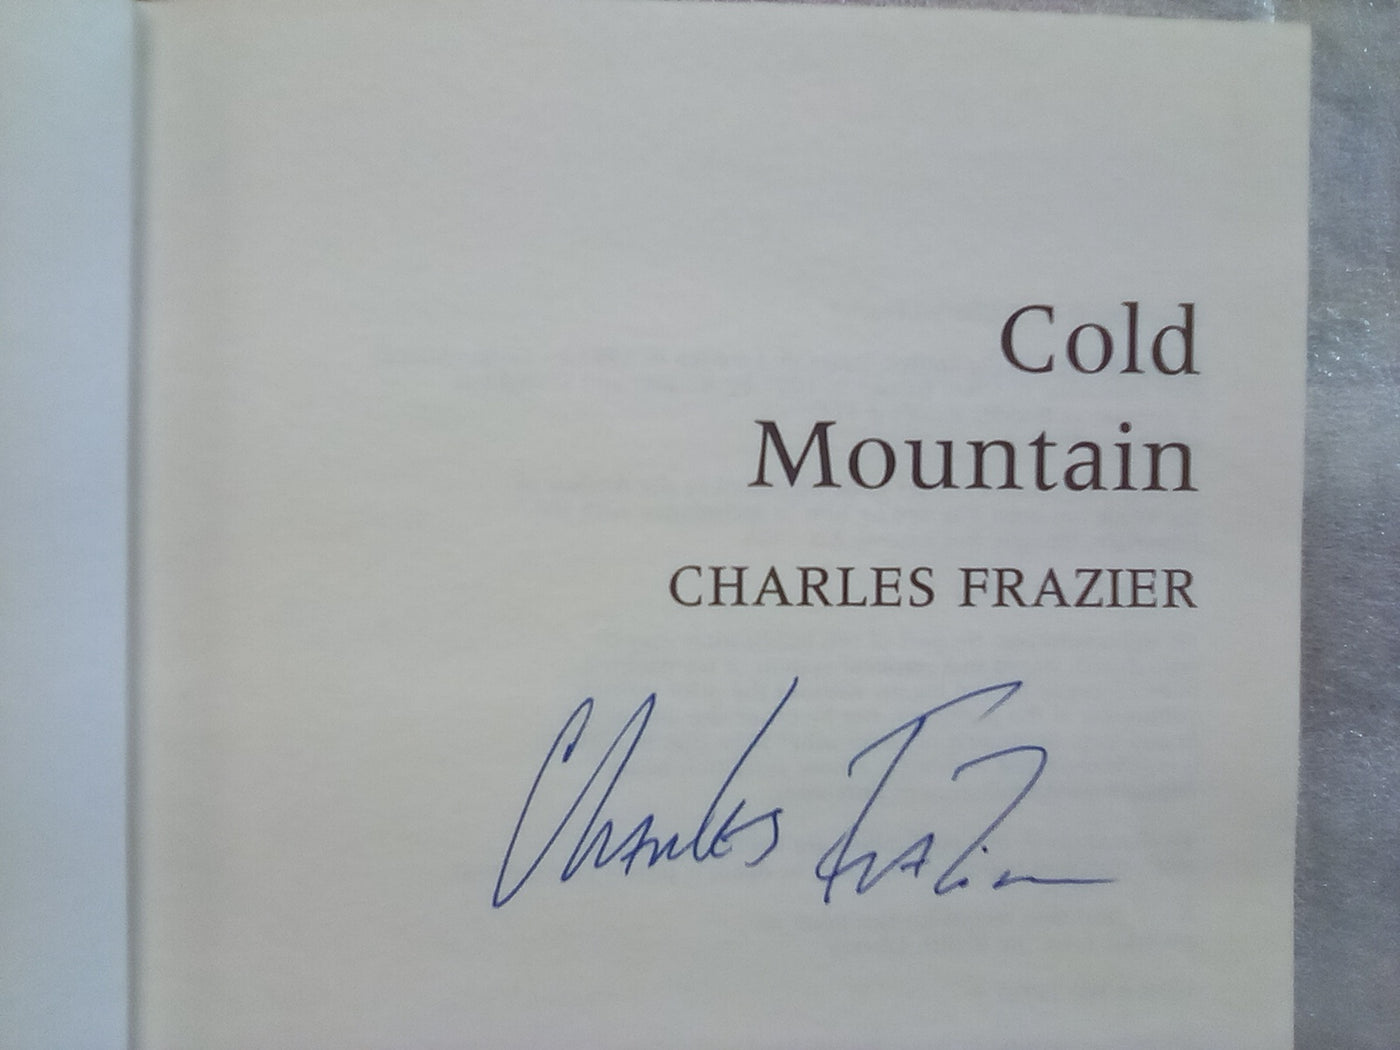 Cold Mountain by Charles Frazier (UK 1st. Edition Signed copy)